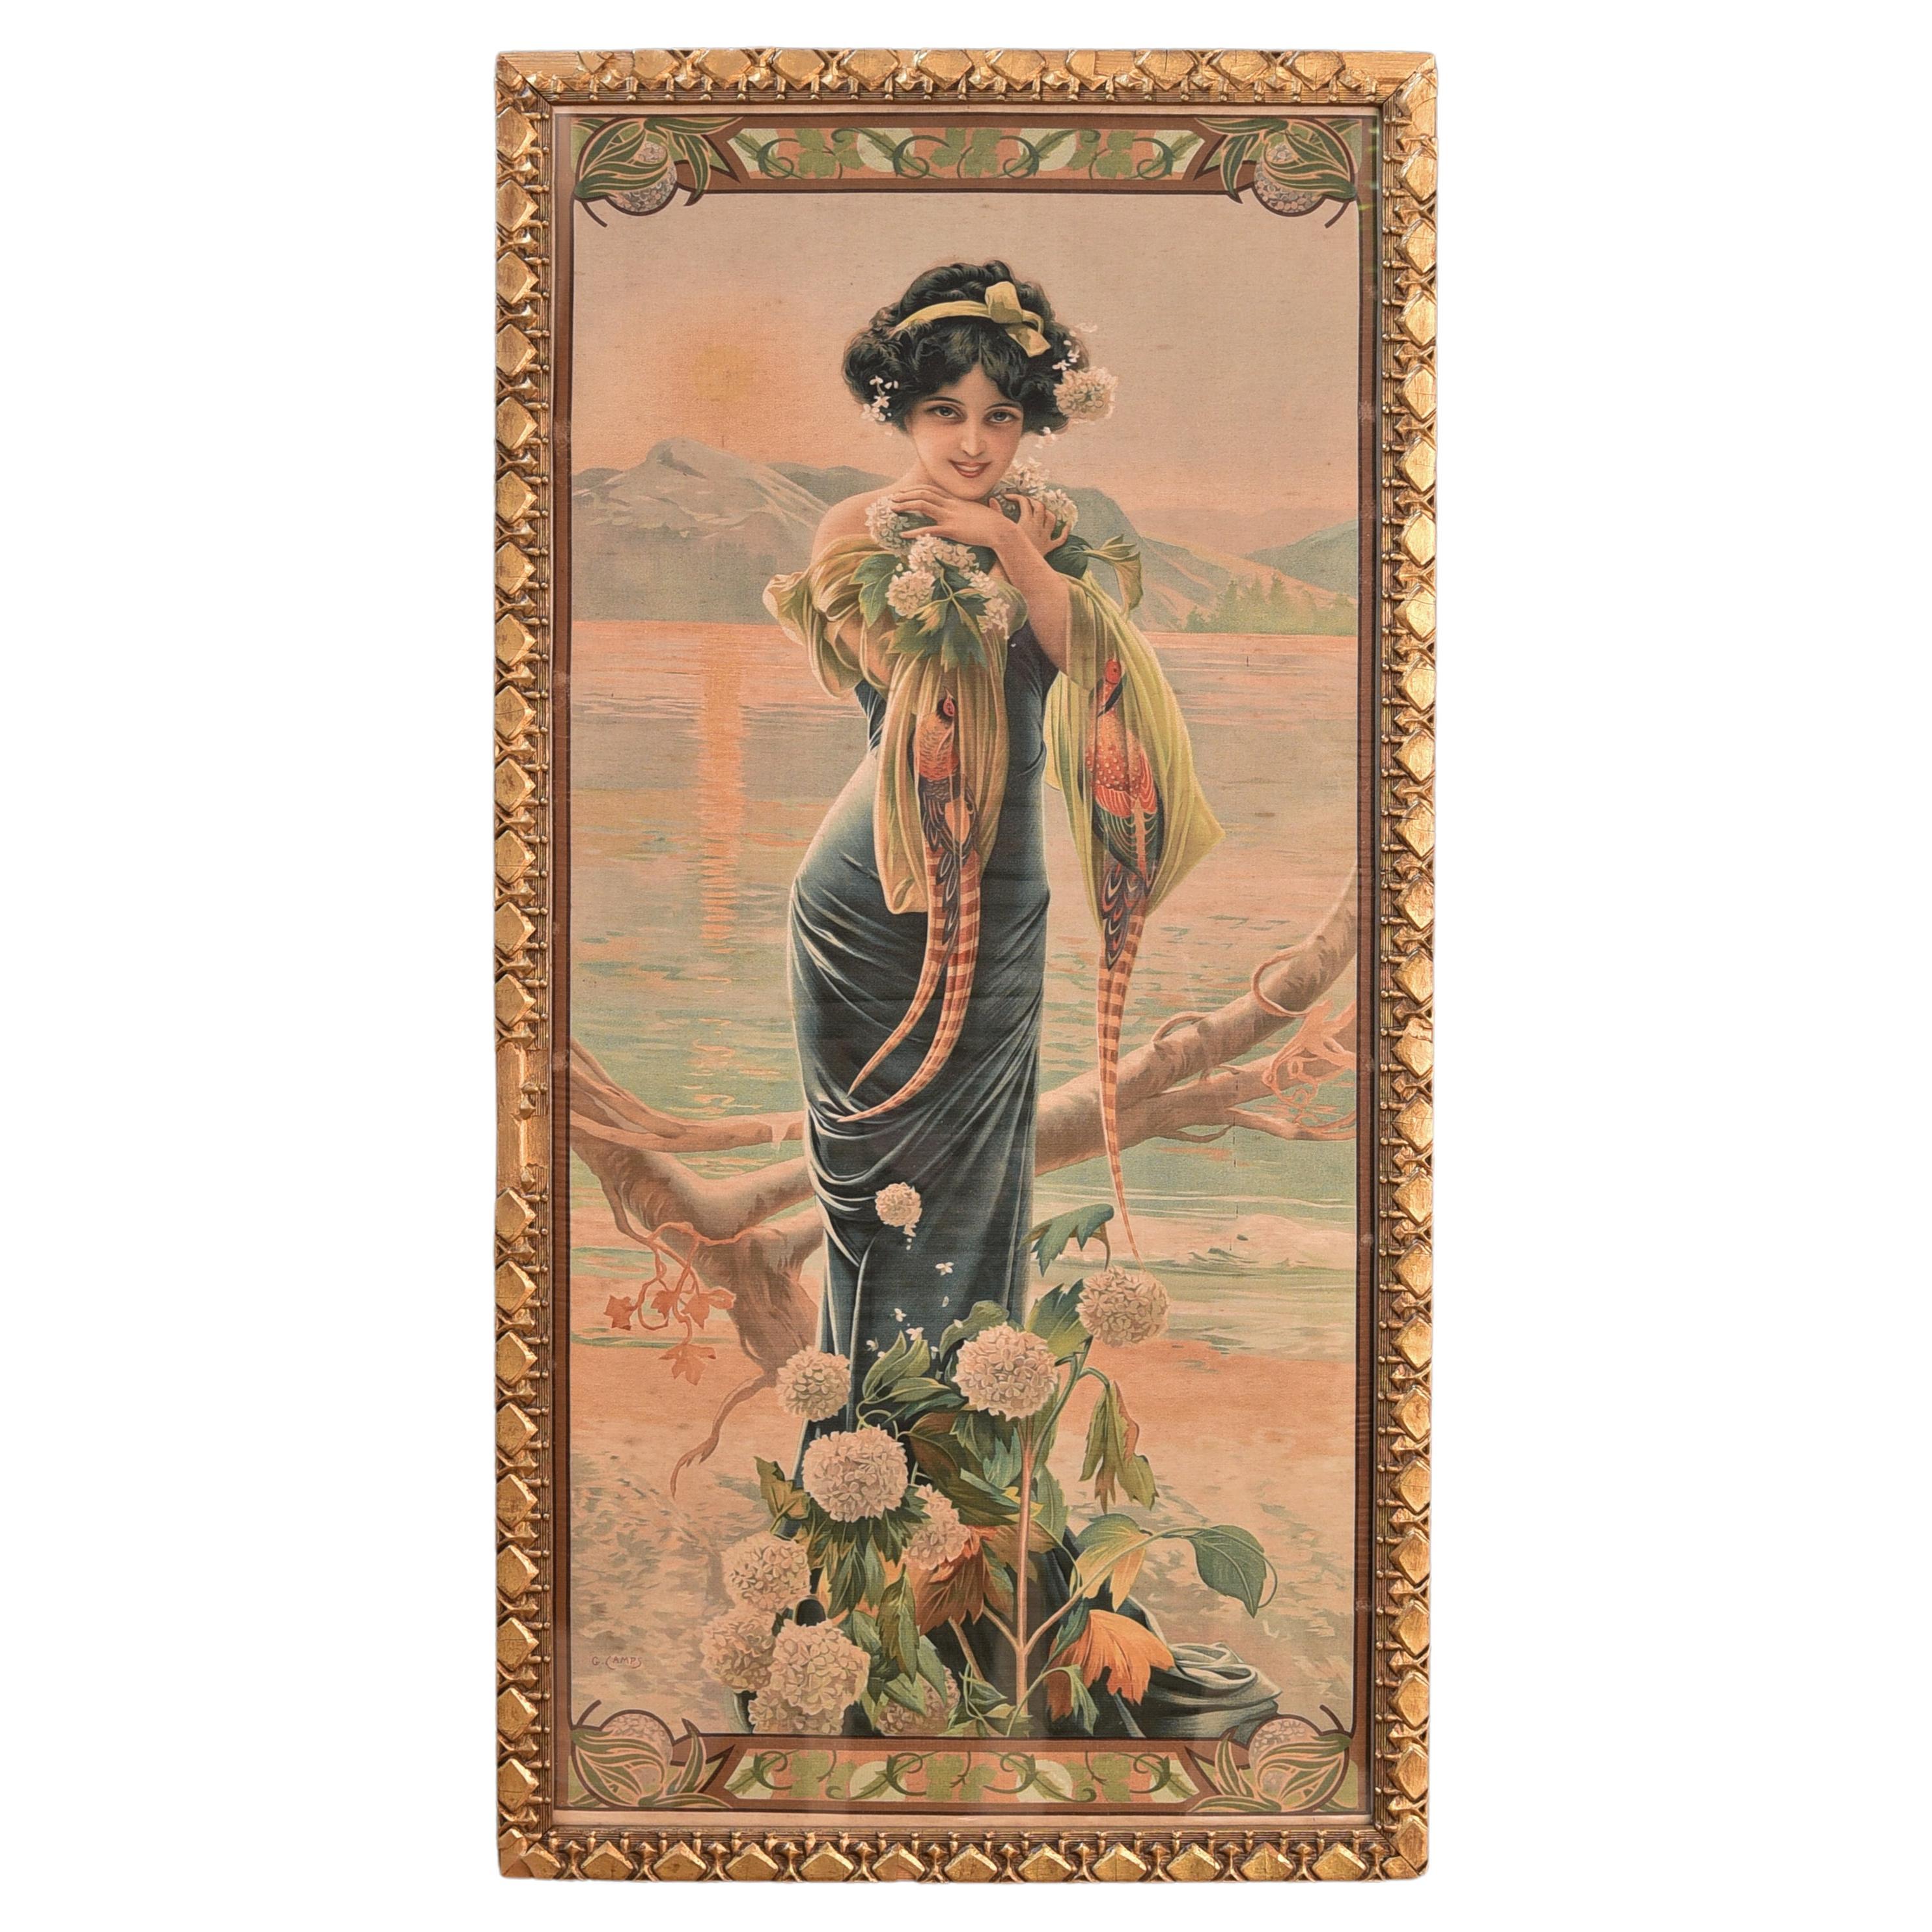 Lithograph of woman and flowers on silk (1904), by Gaspar Camps For Sale